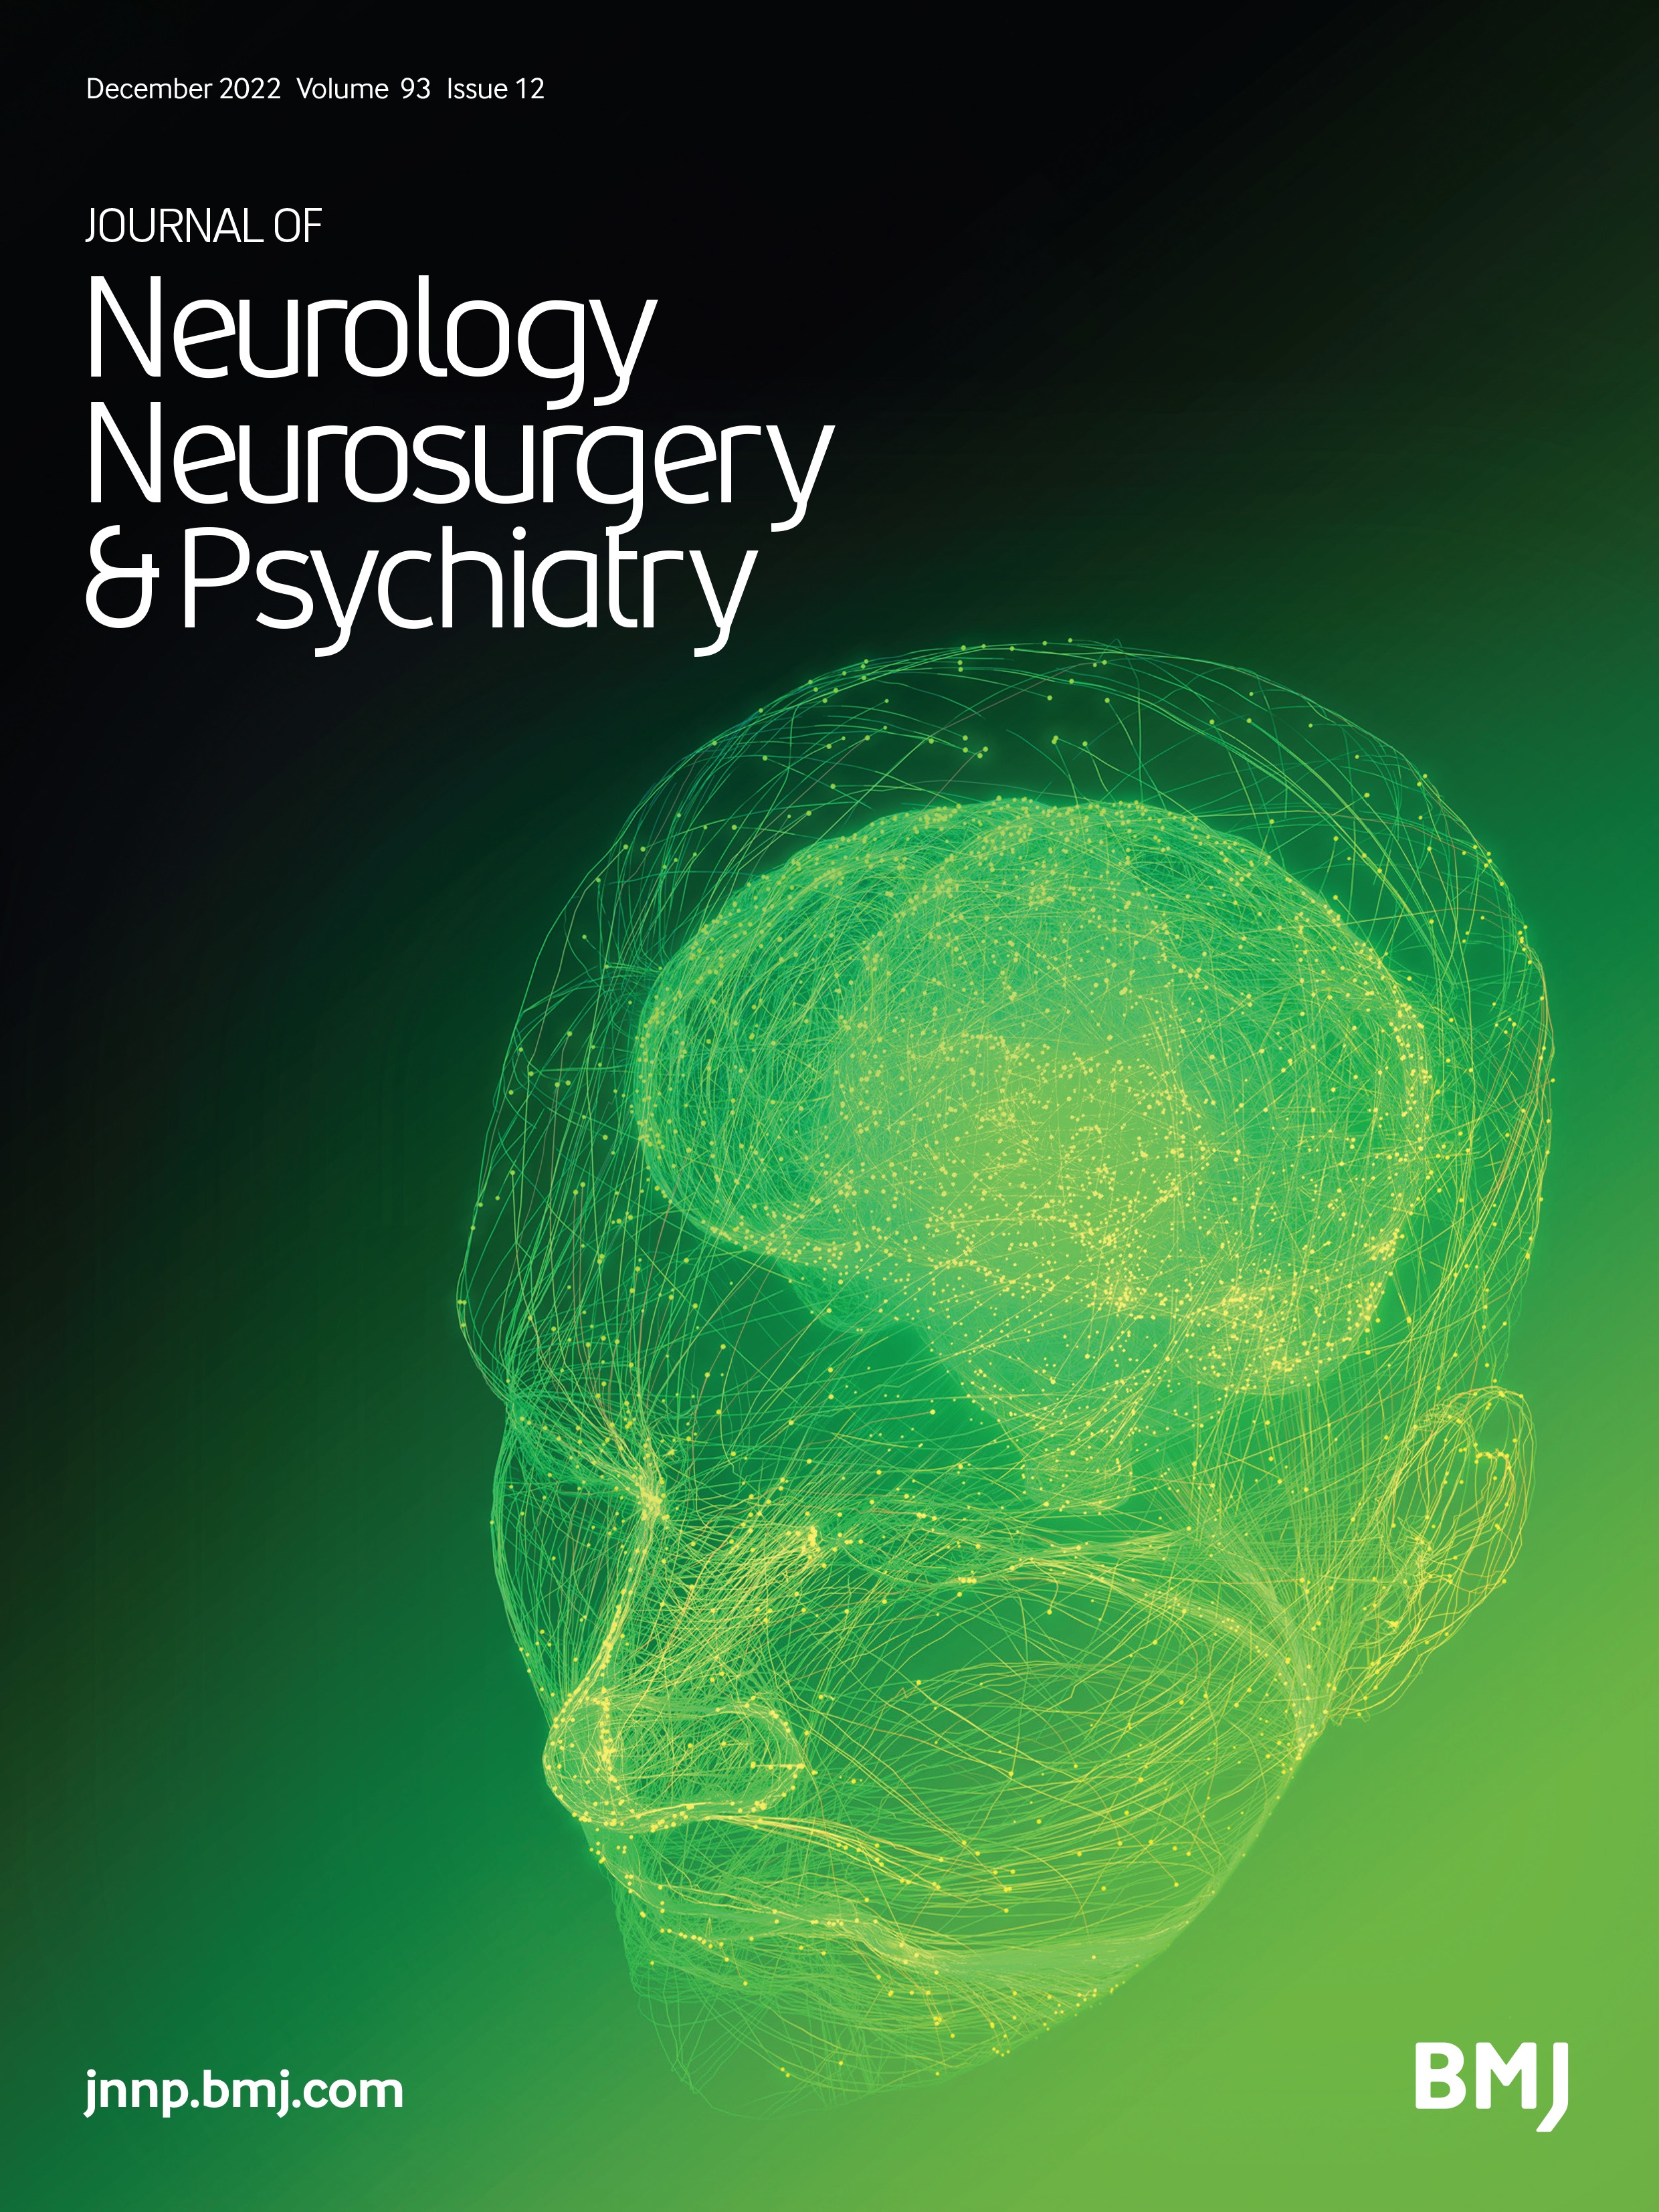 28 Functional neurological disorder in the chronic pain clinic; a retrospective study of comorbidity